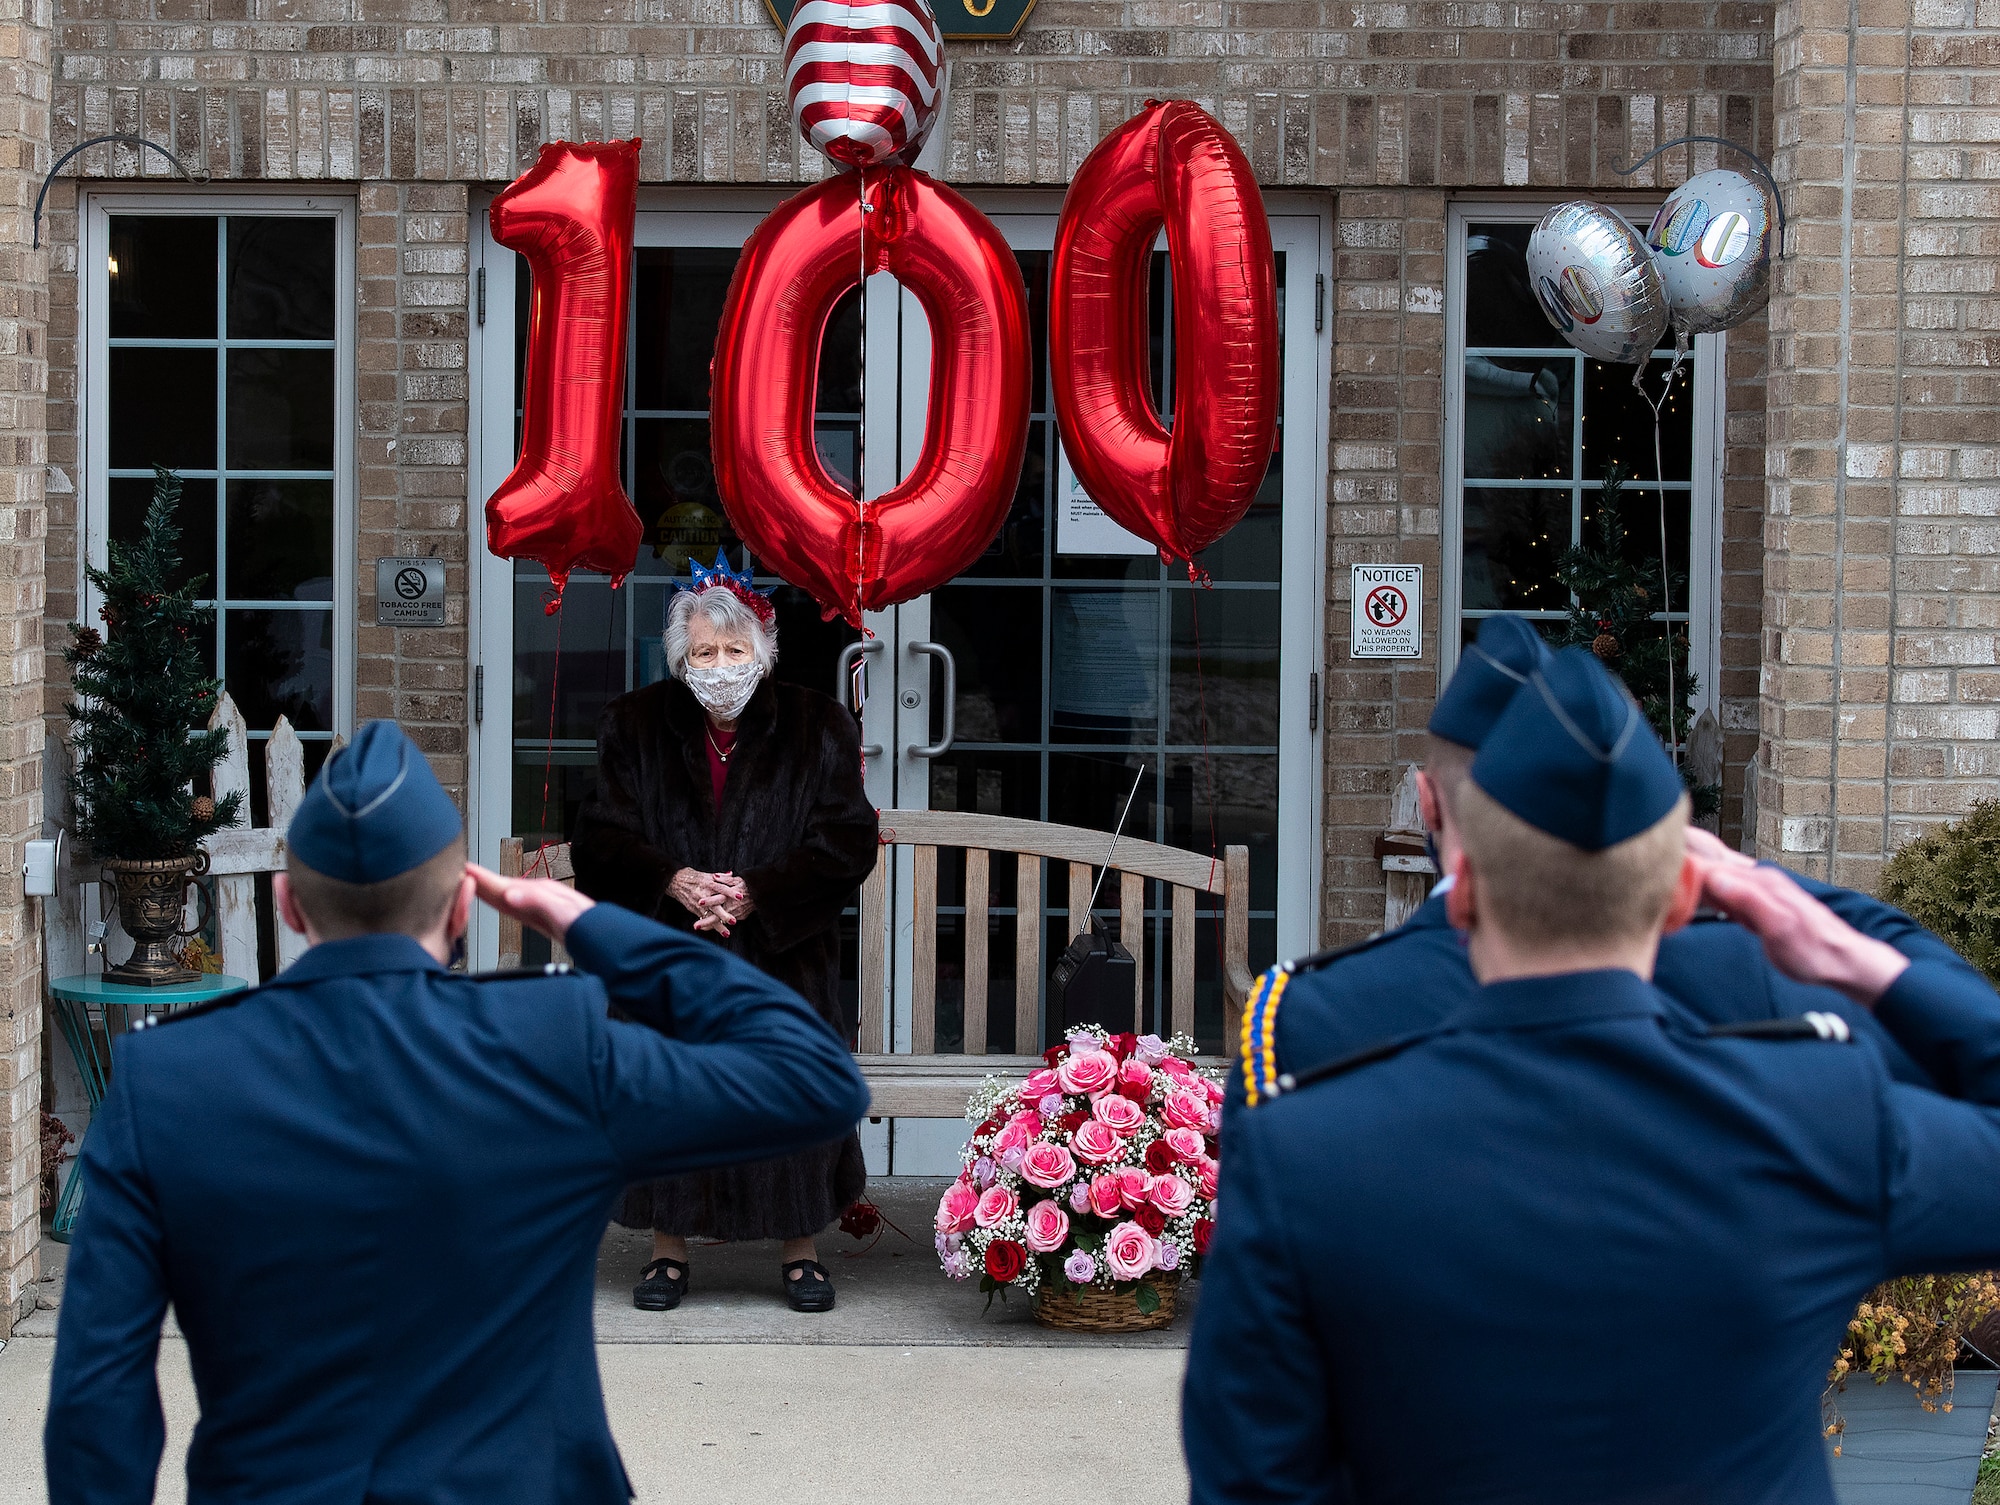 Air Force ROTC cadets salute Tipi Minnehan Dec. 23, 2020, on her 100th birthday in Fairborn, Ohio. Minnehan is a veteran having served in the Army during, and for a few years after, World War II. (U.S. Air Force photo by R.J. Oriez)